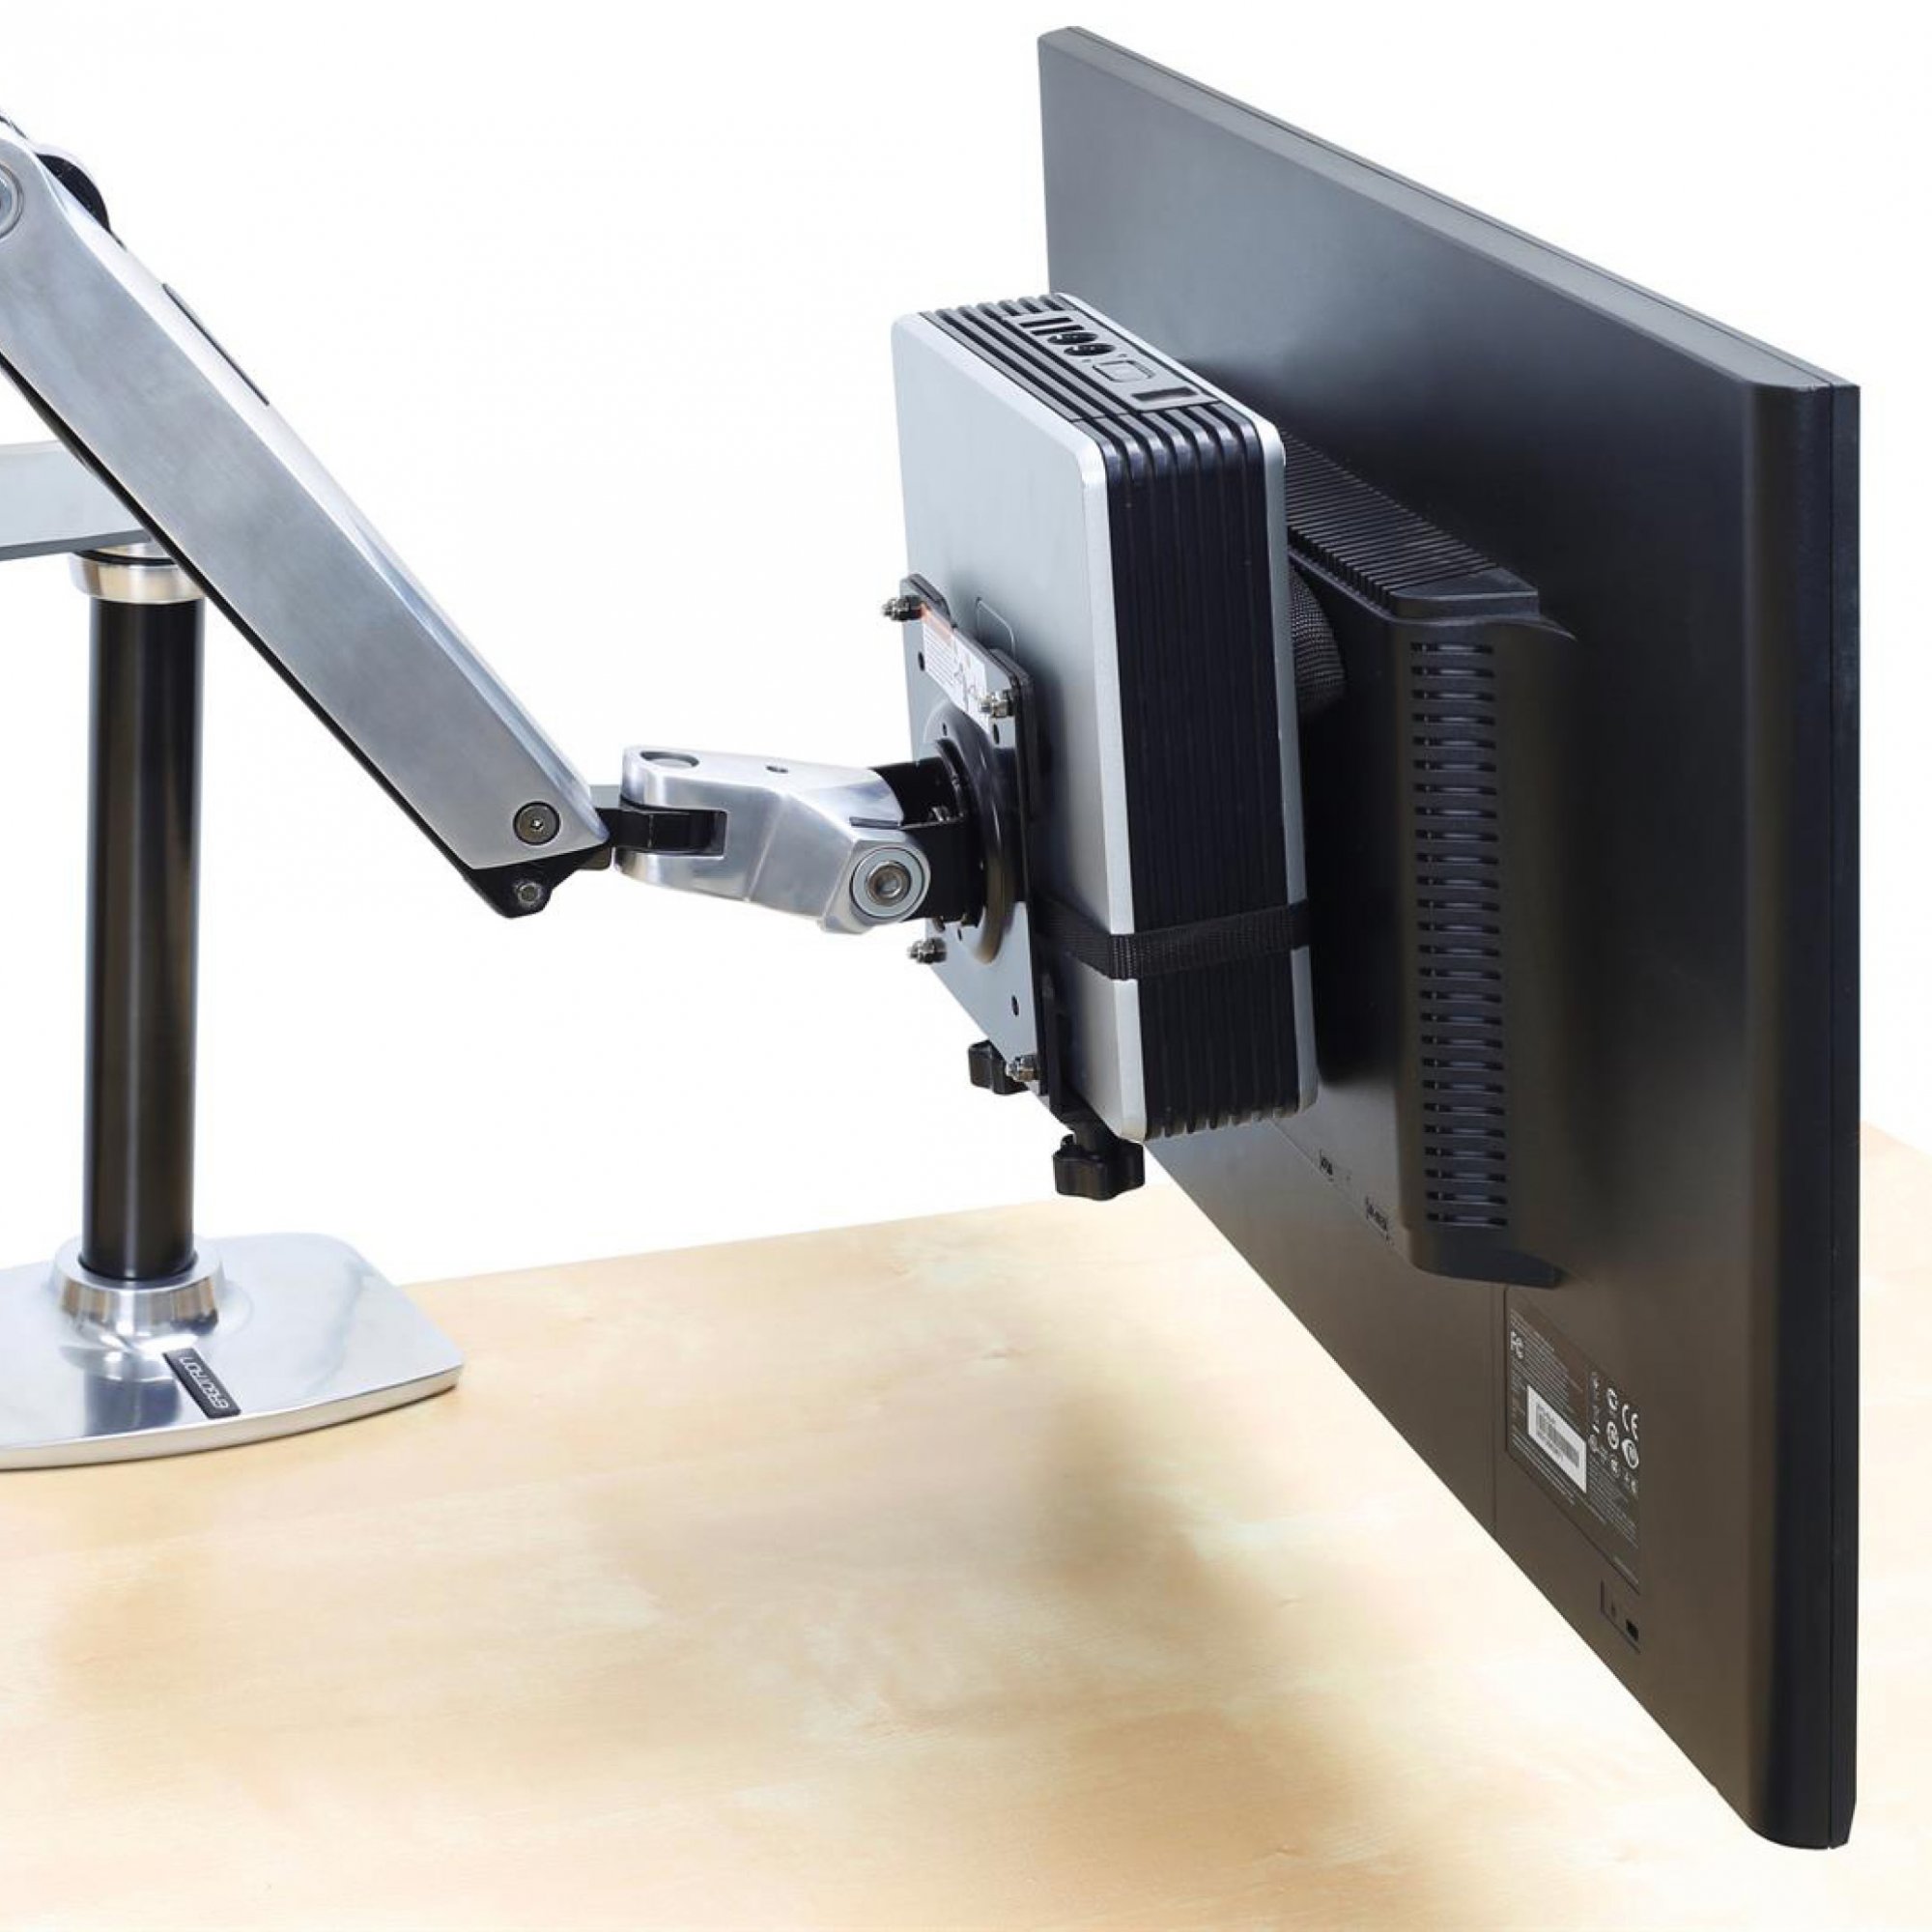 Install a small CPU to the Monitor with Ergotron 80-107-200 Thin Client Mount